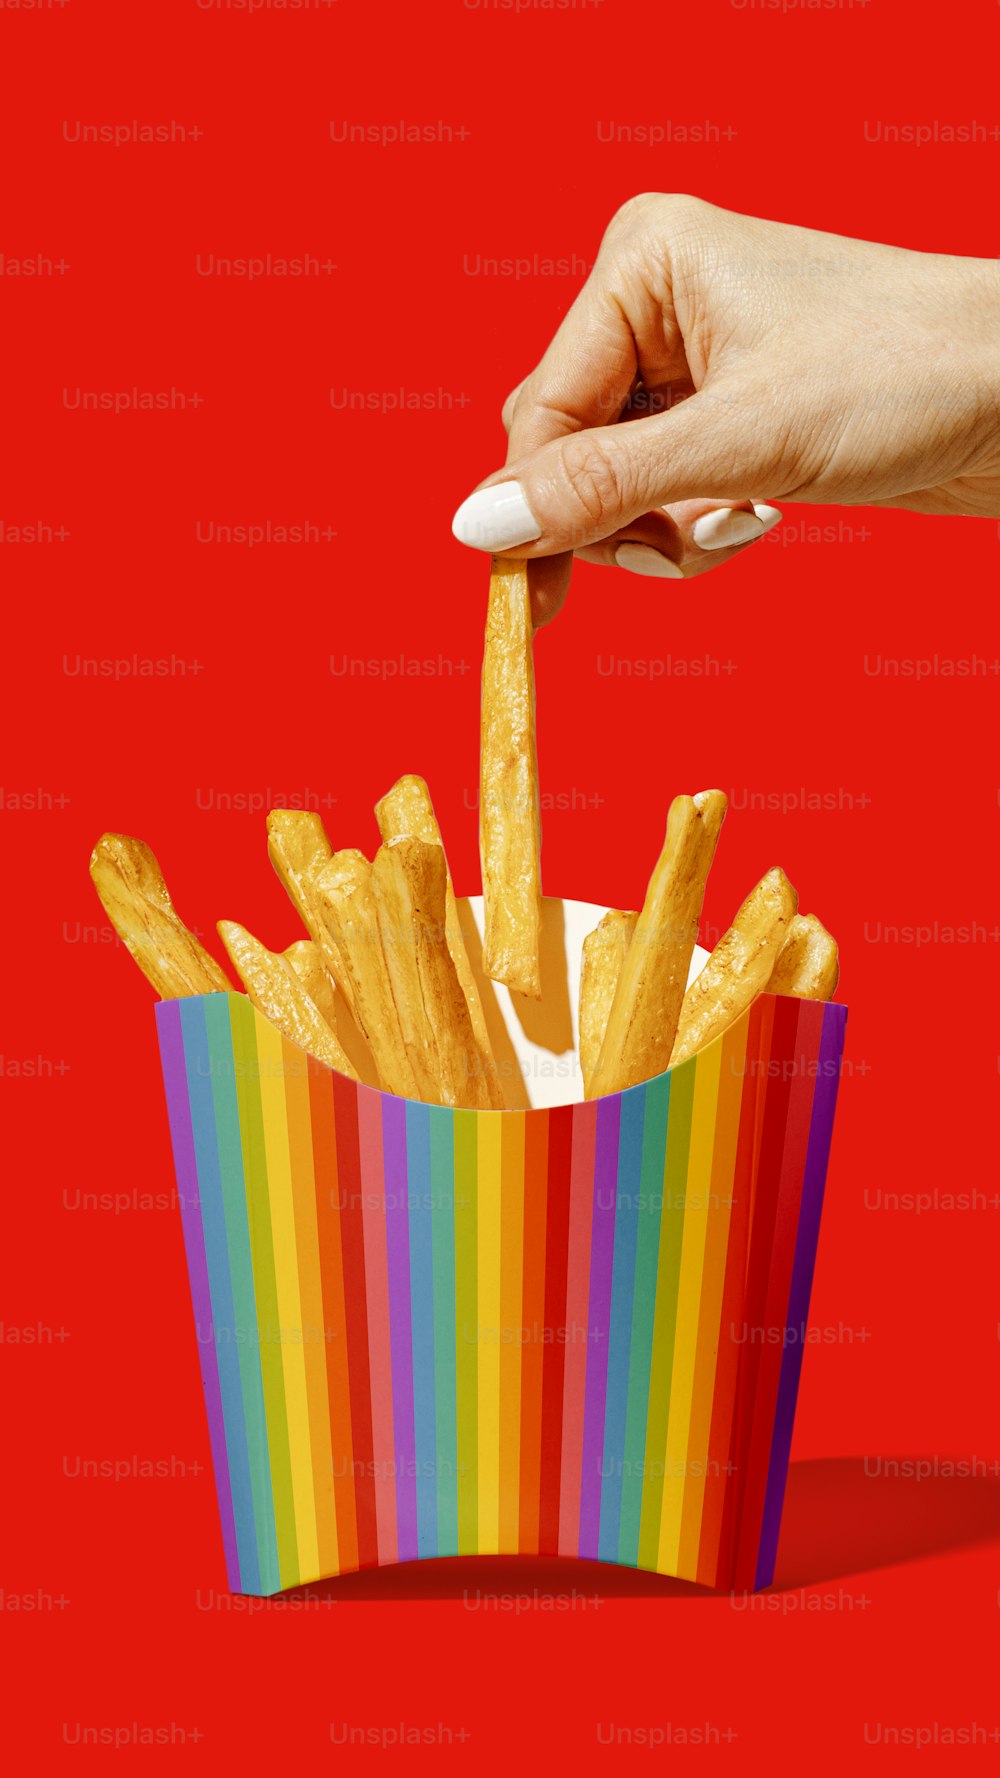 a hand reaching for french fries in a colorful box